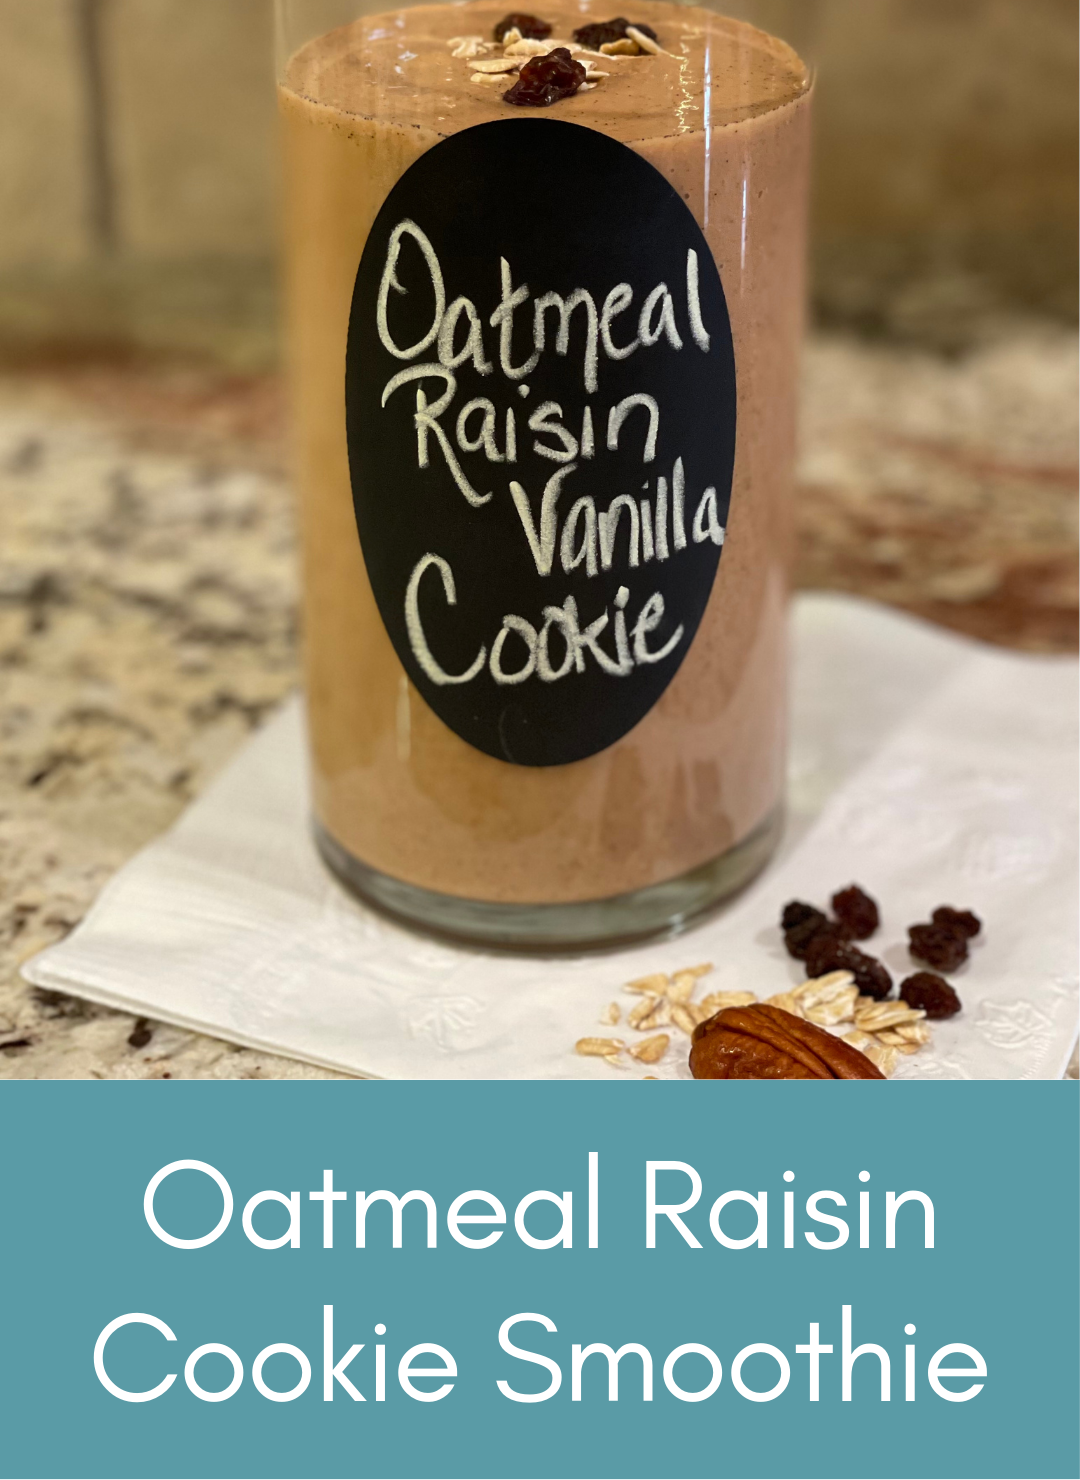 Oatmeal raisin vanilla protein cookie whole food plant based vegan smoothie Picture with link to recipe